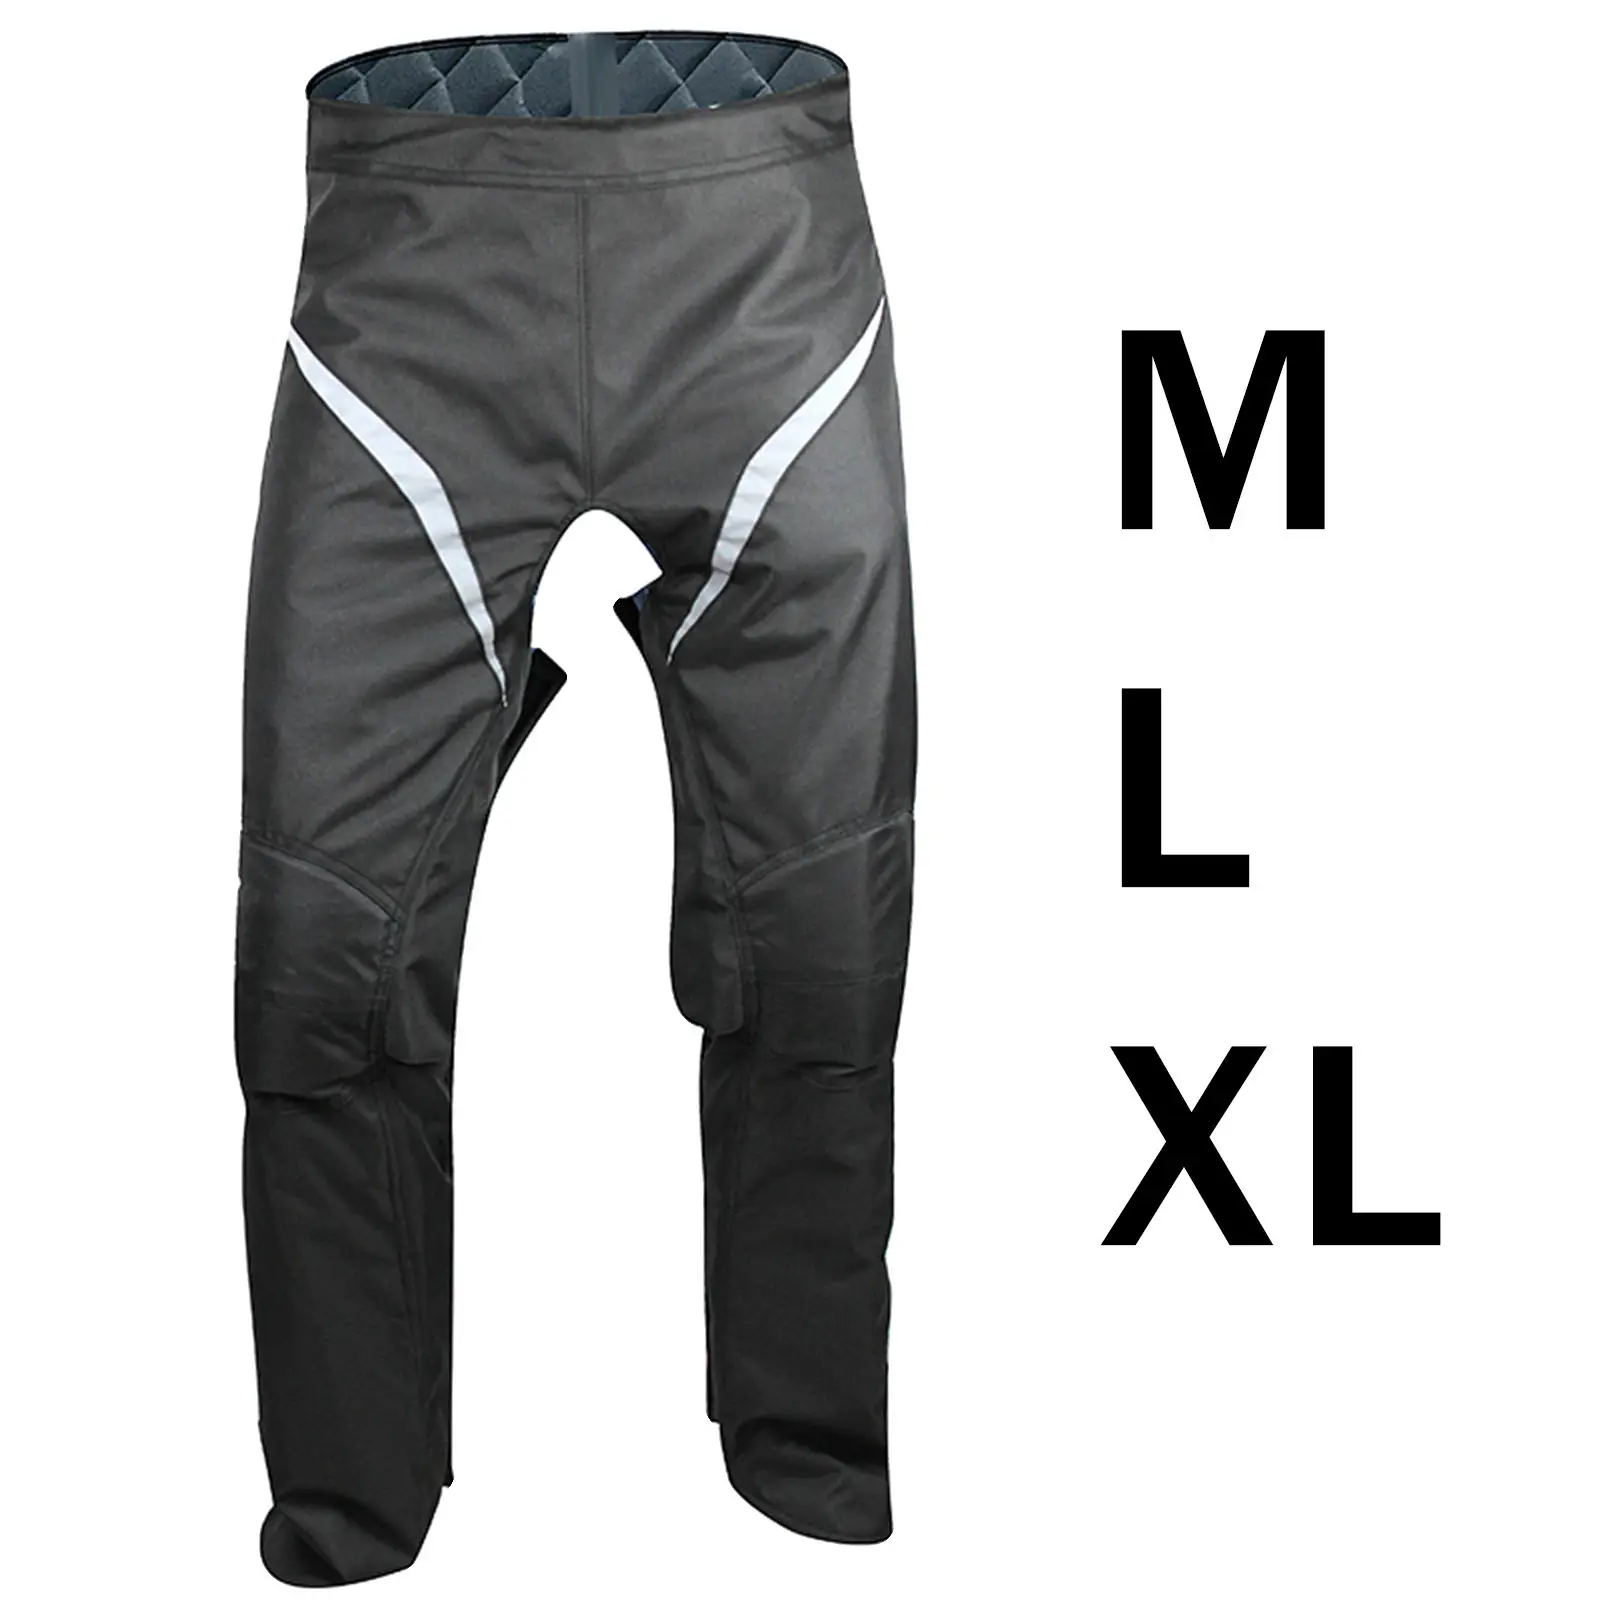 Motocross Motorcycle Pants for Men Leg Covers for Biker Trousers in Winter Lock Temperature Leg Warm Protector